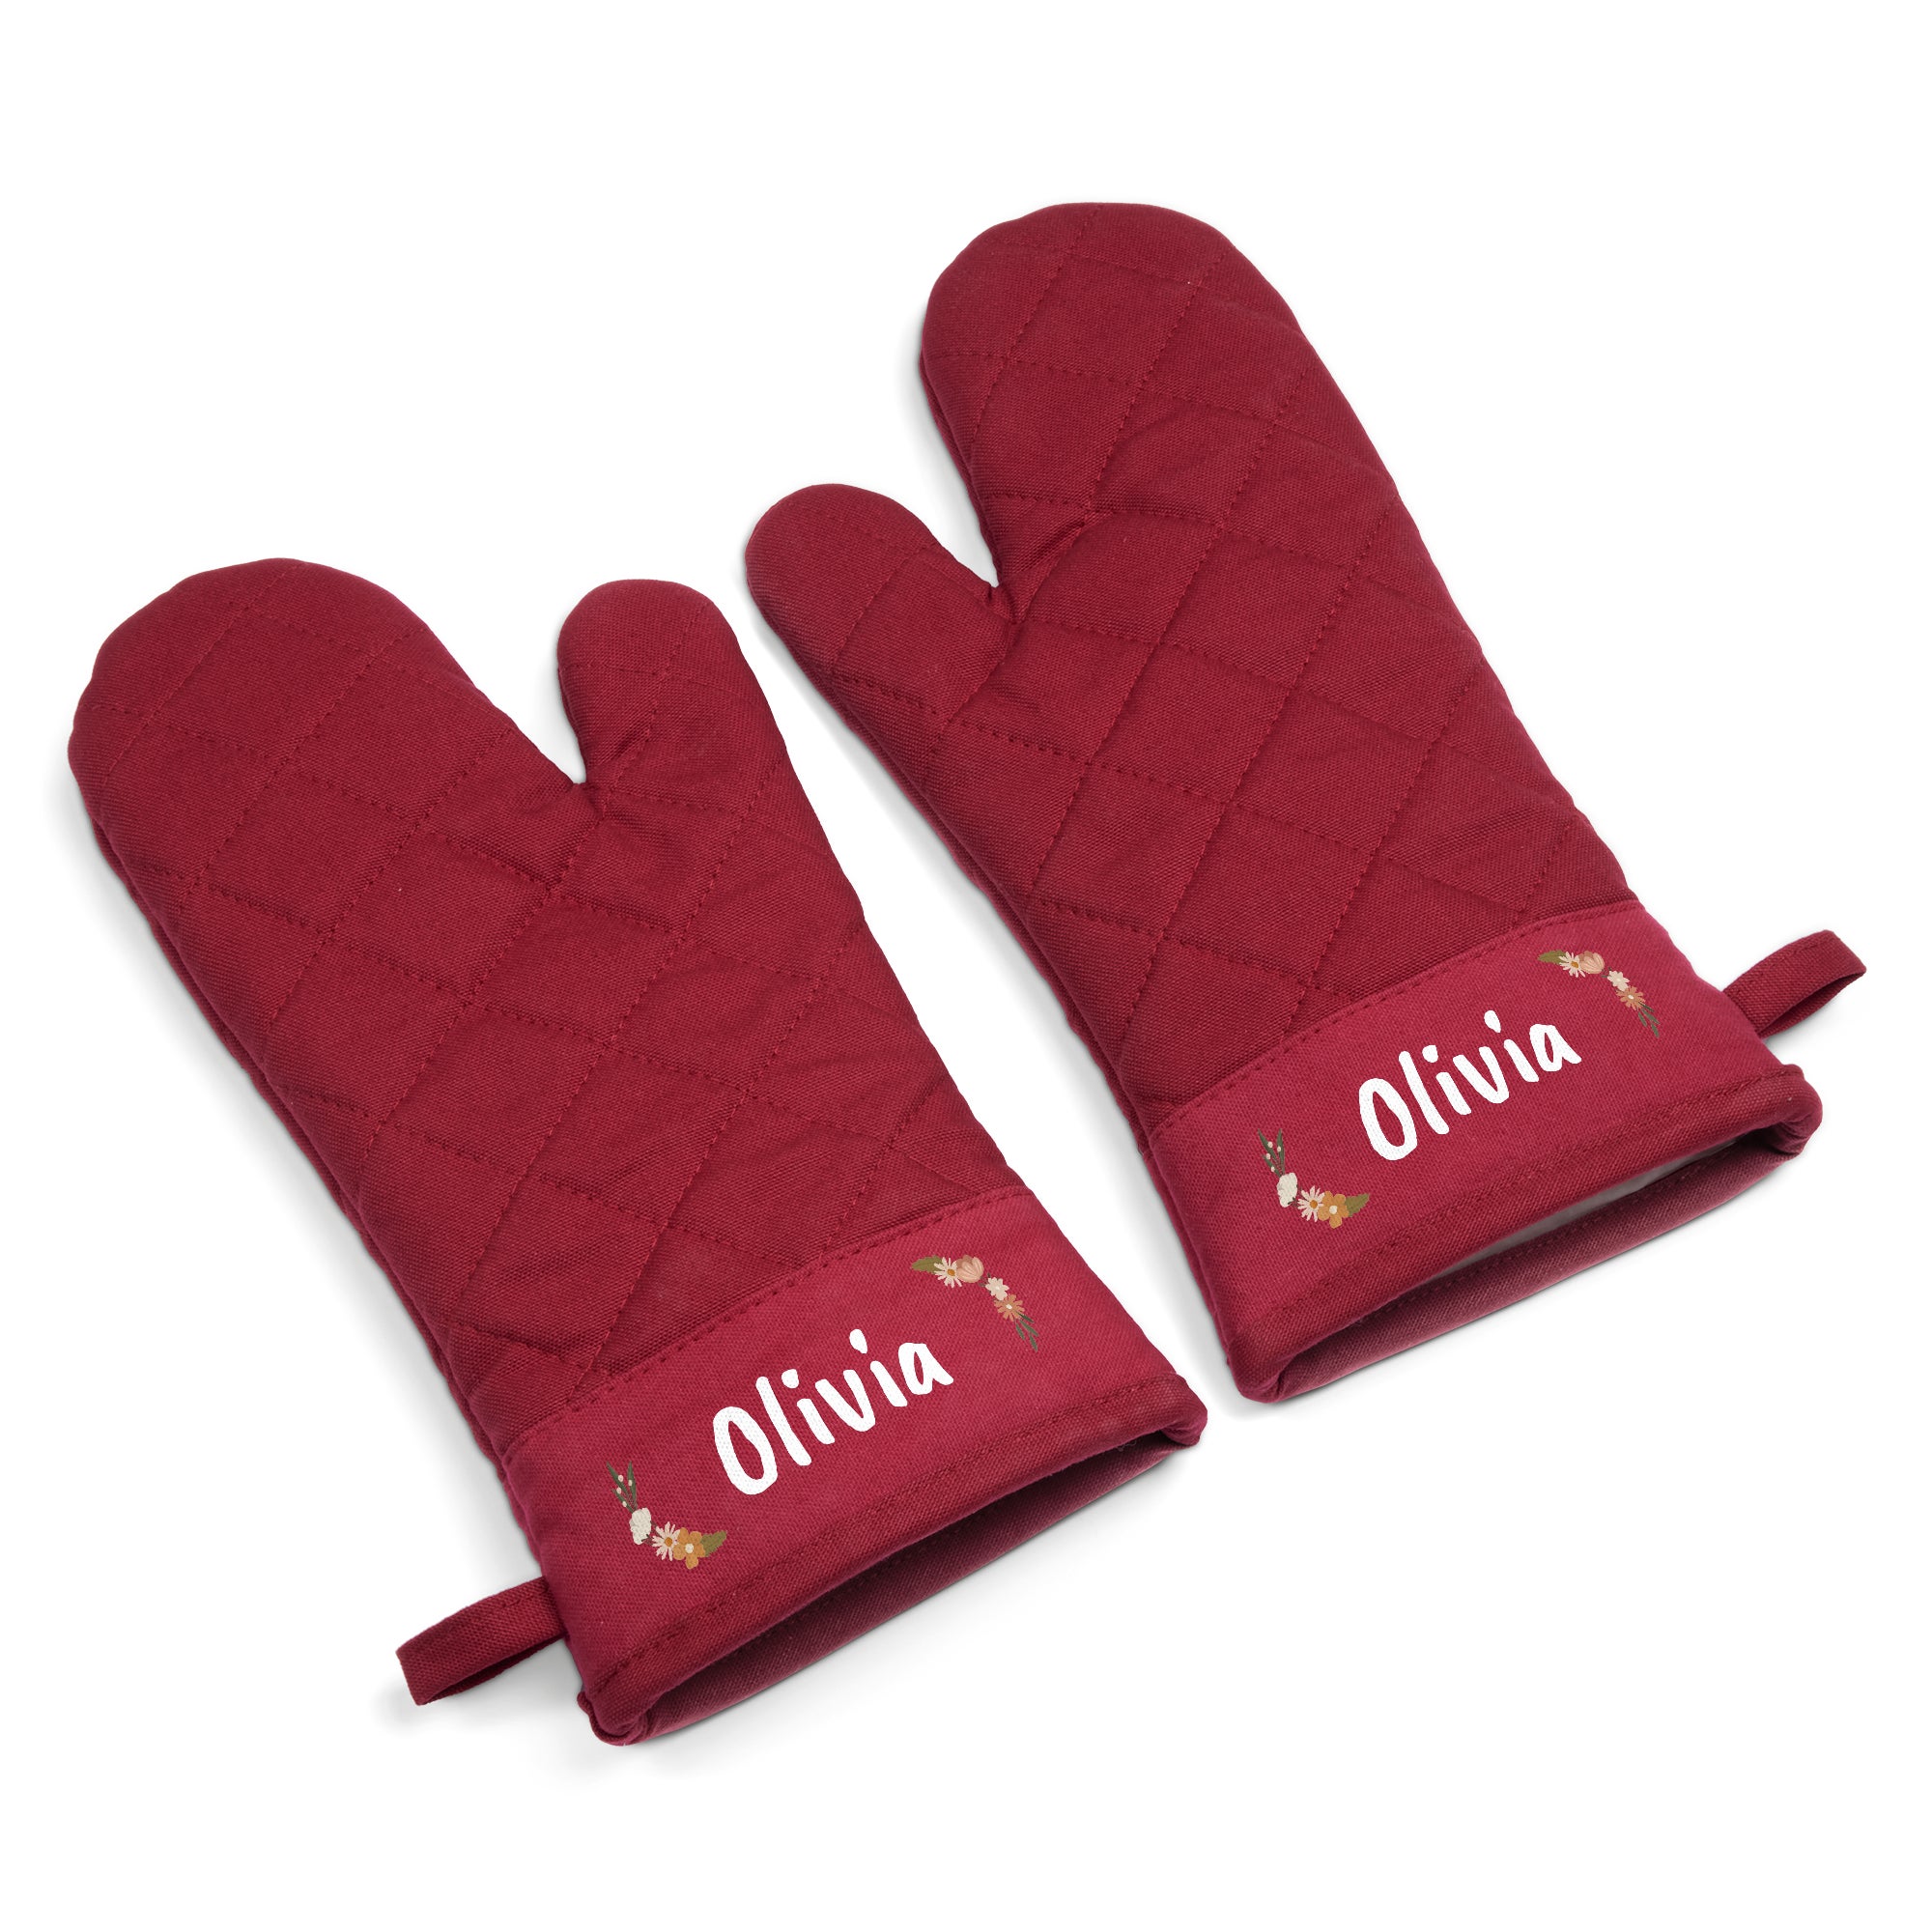 Personalised oven gloves - 2 pcs - Burgundy